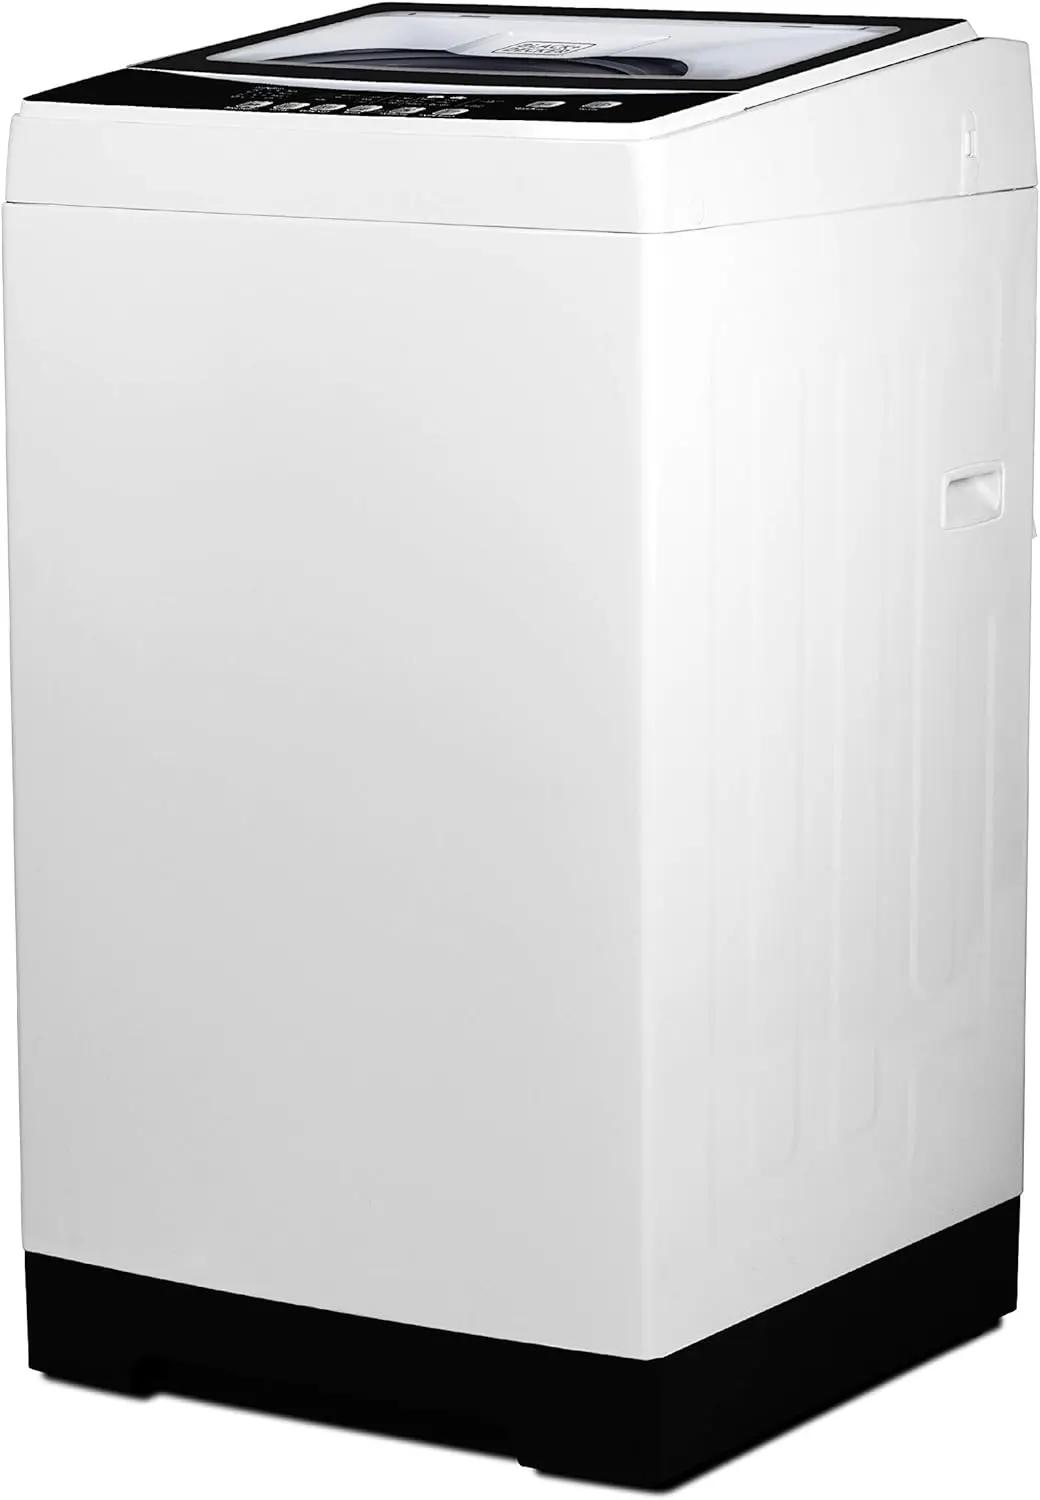 Small Portable Washer, Washing Machine for Household Use, Portable Washe... - $516.47